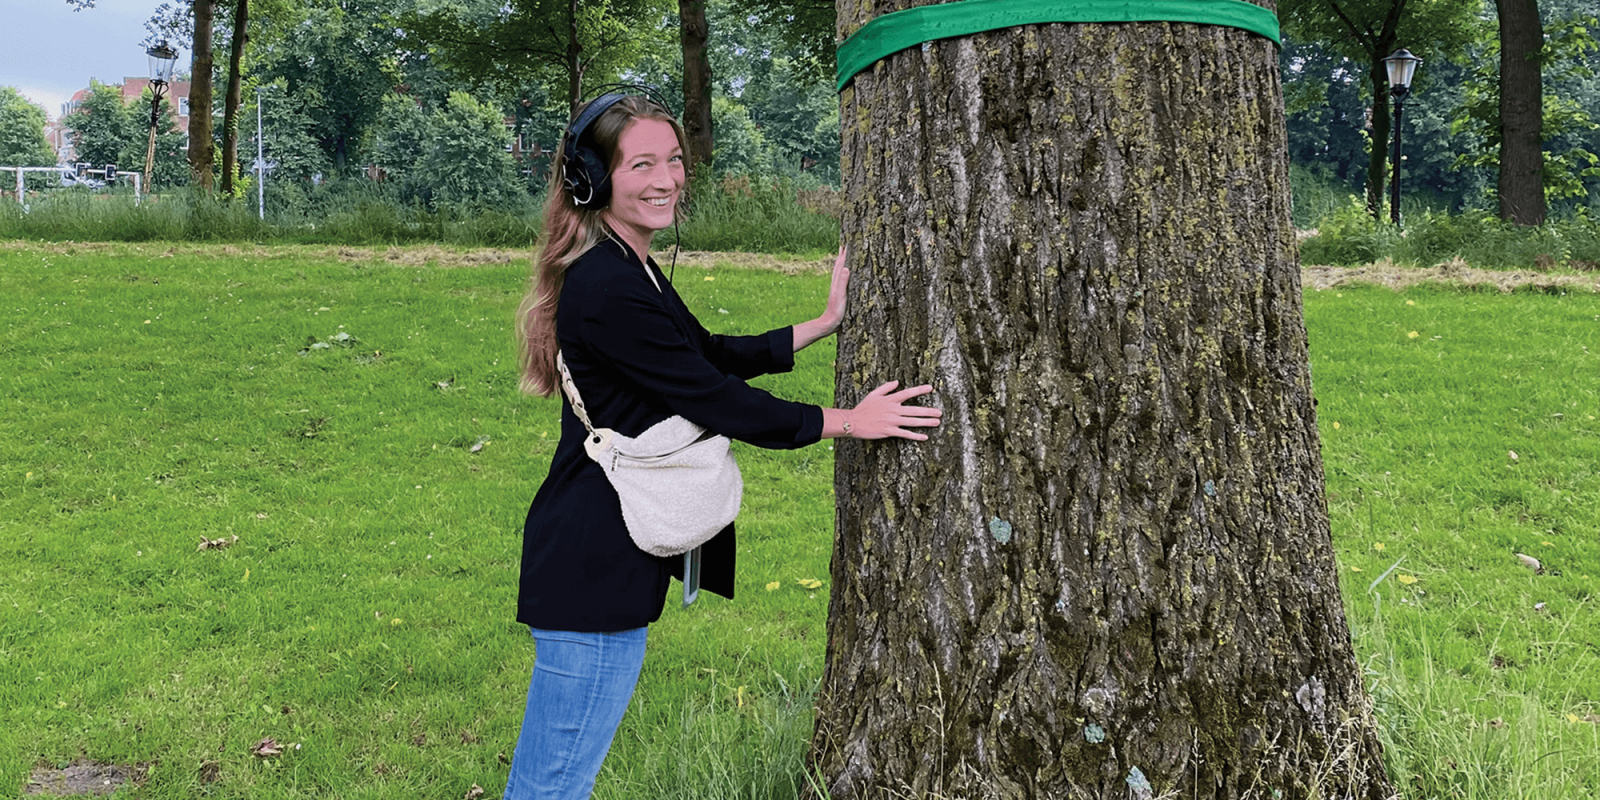 Trees can talk - Are we listening?